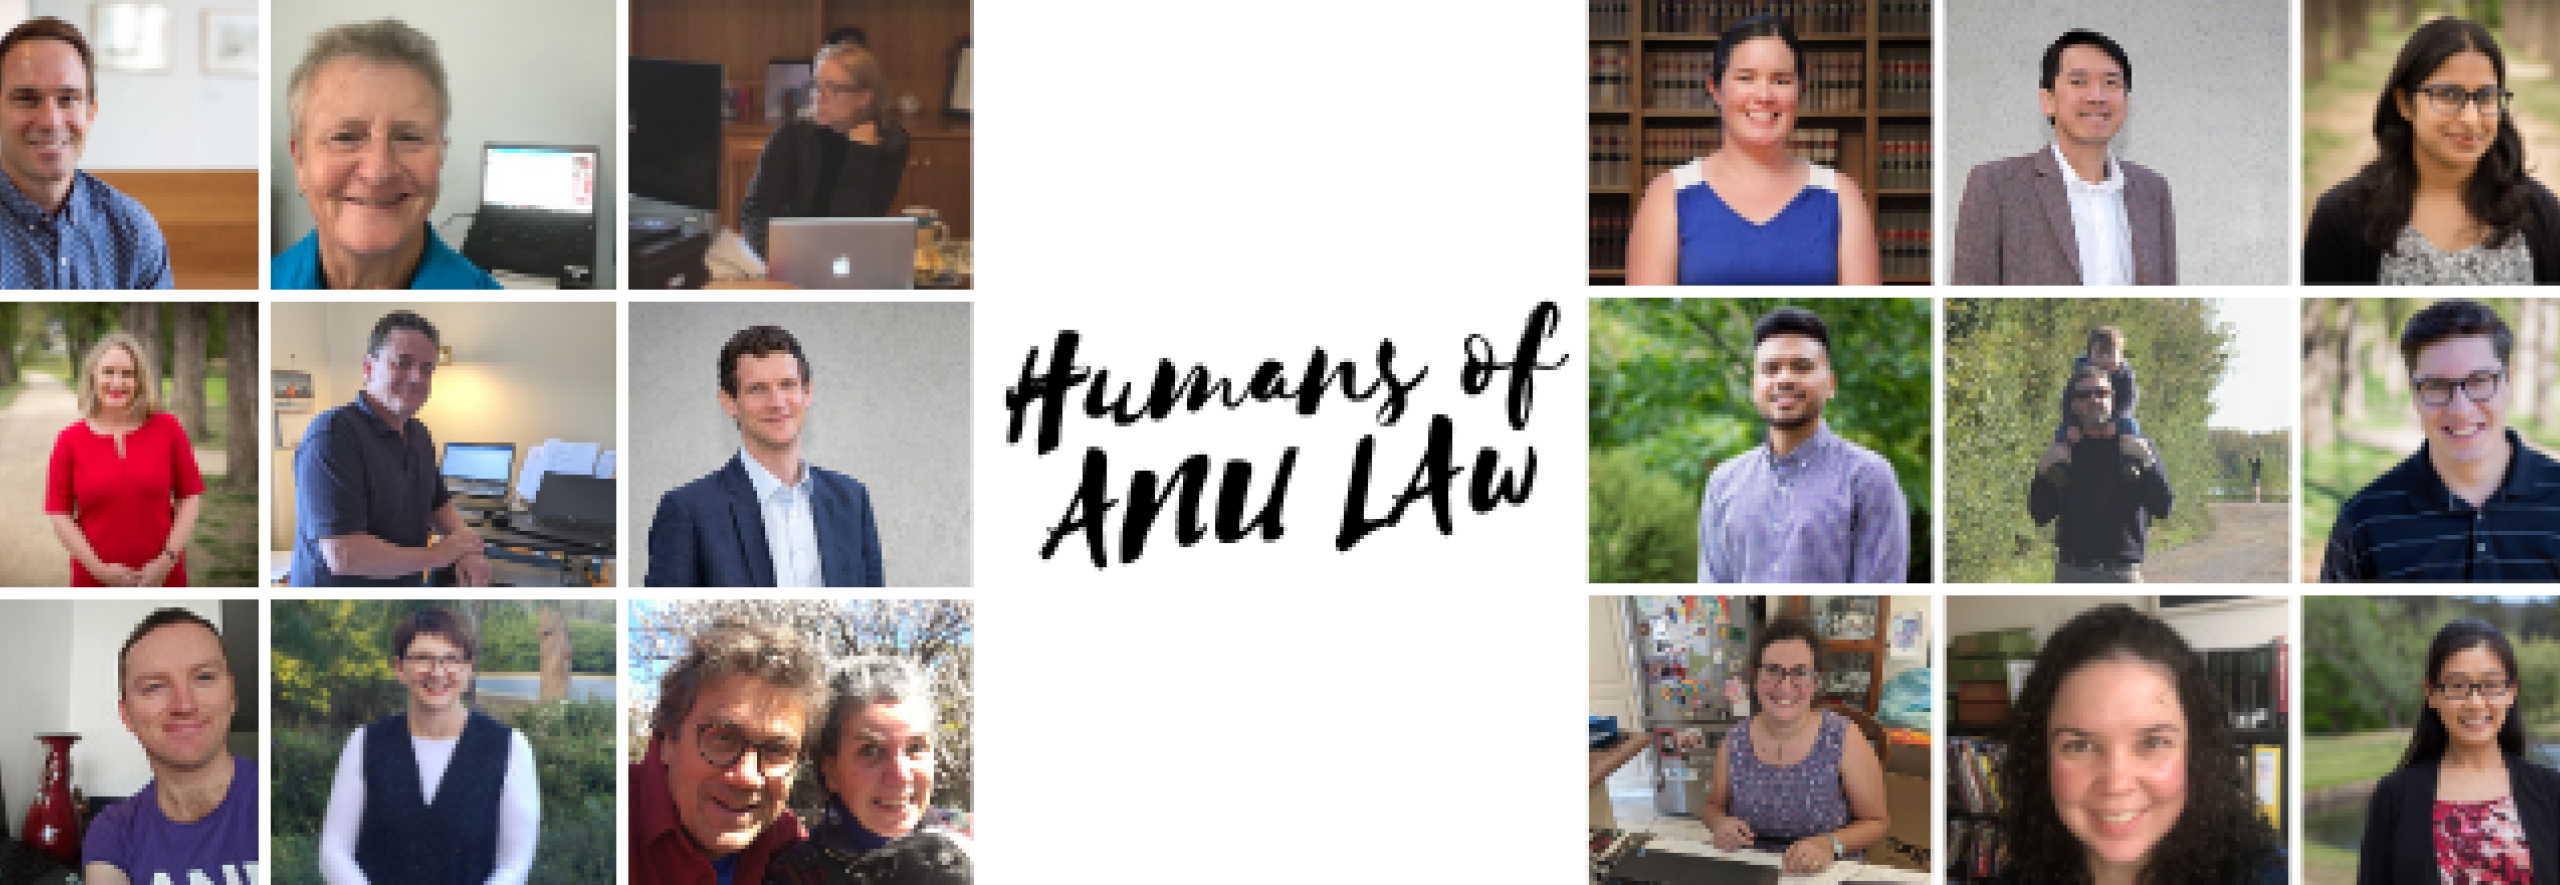 Humans of ANU Law